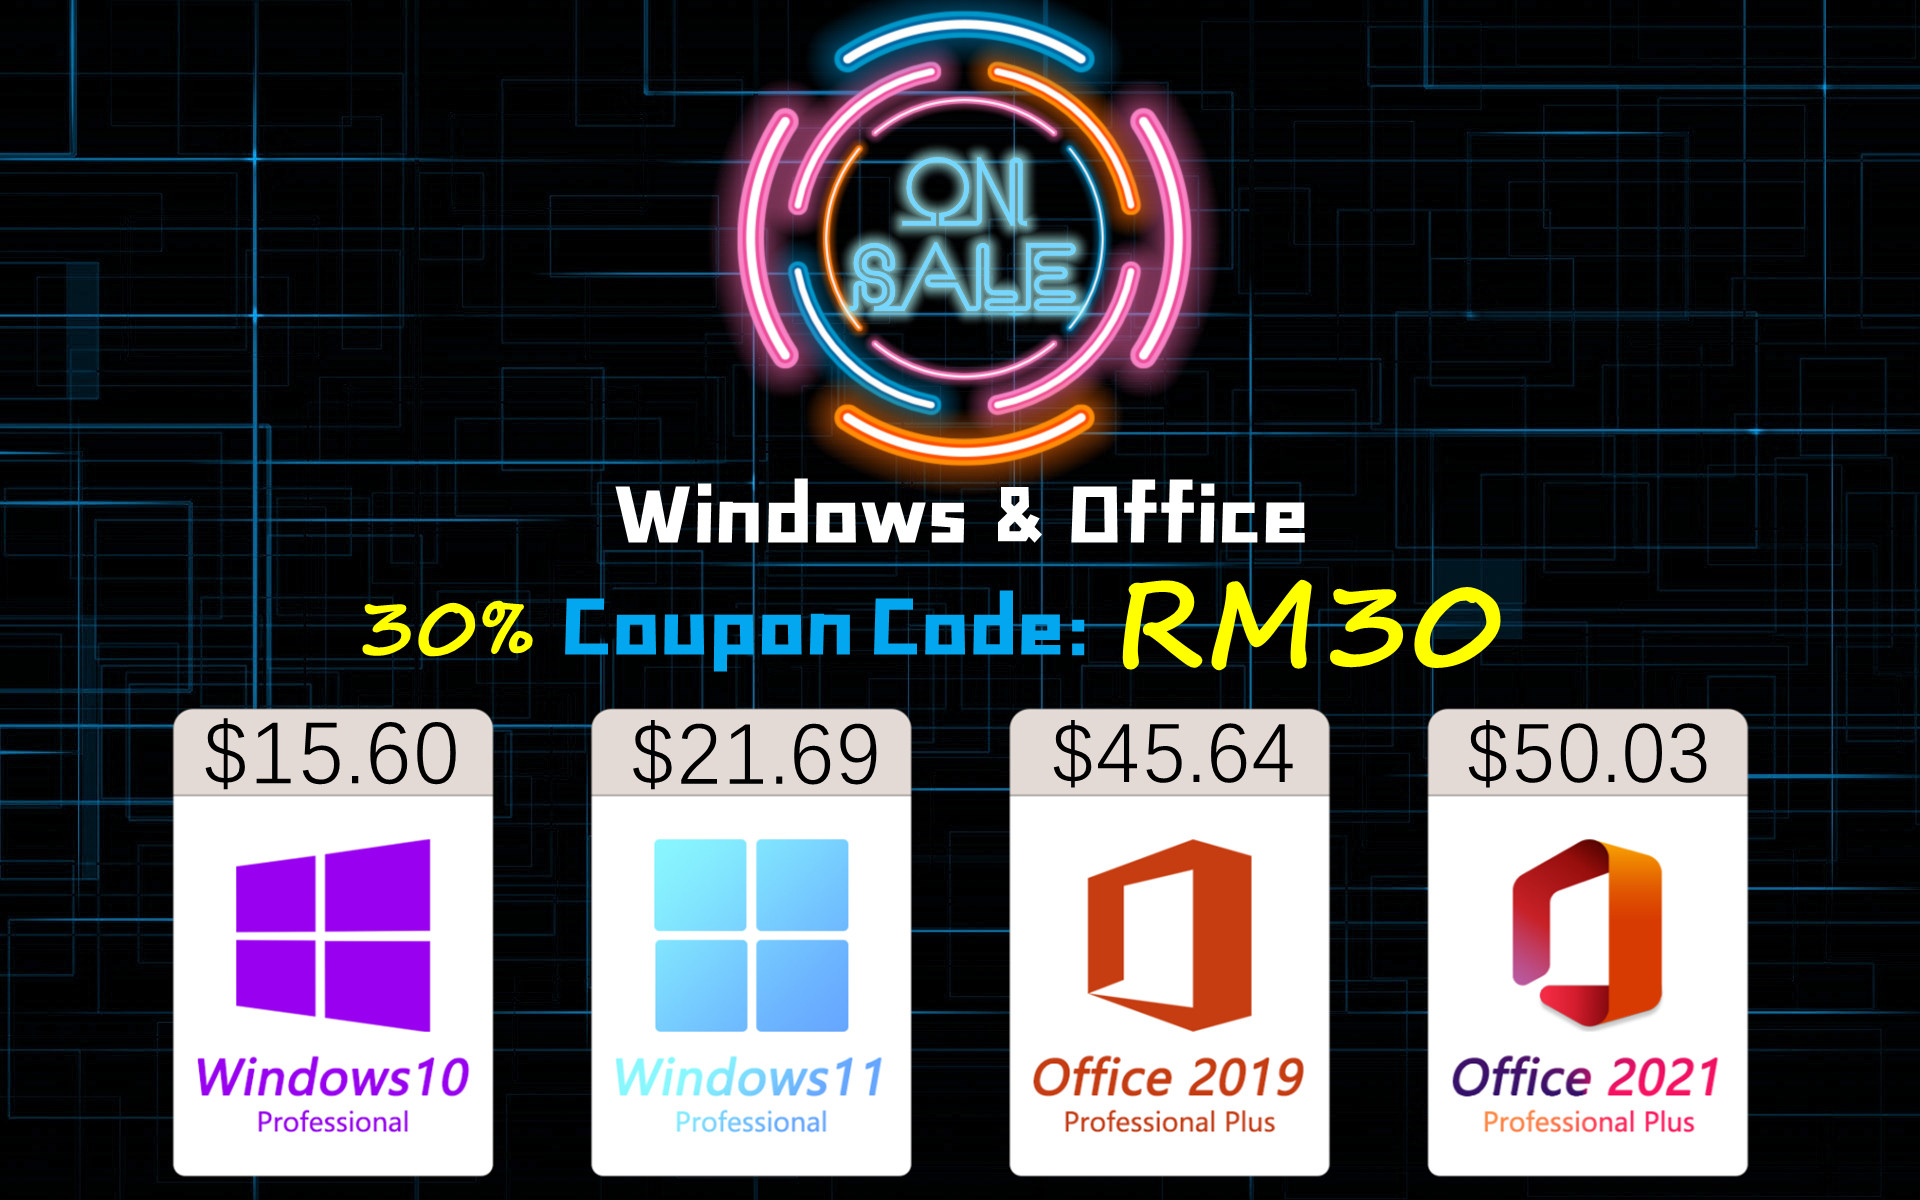 Get Windows 10 Pro For Just $12, Windows 11 For Only $21, Microsoft Office For Only $26, And So Much More